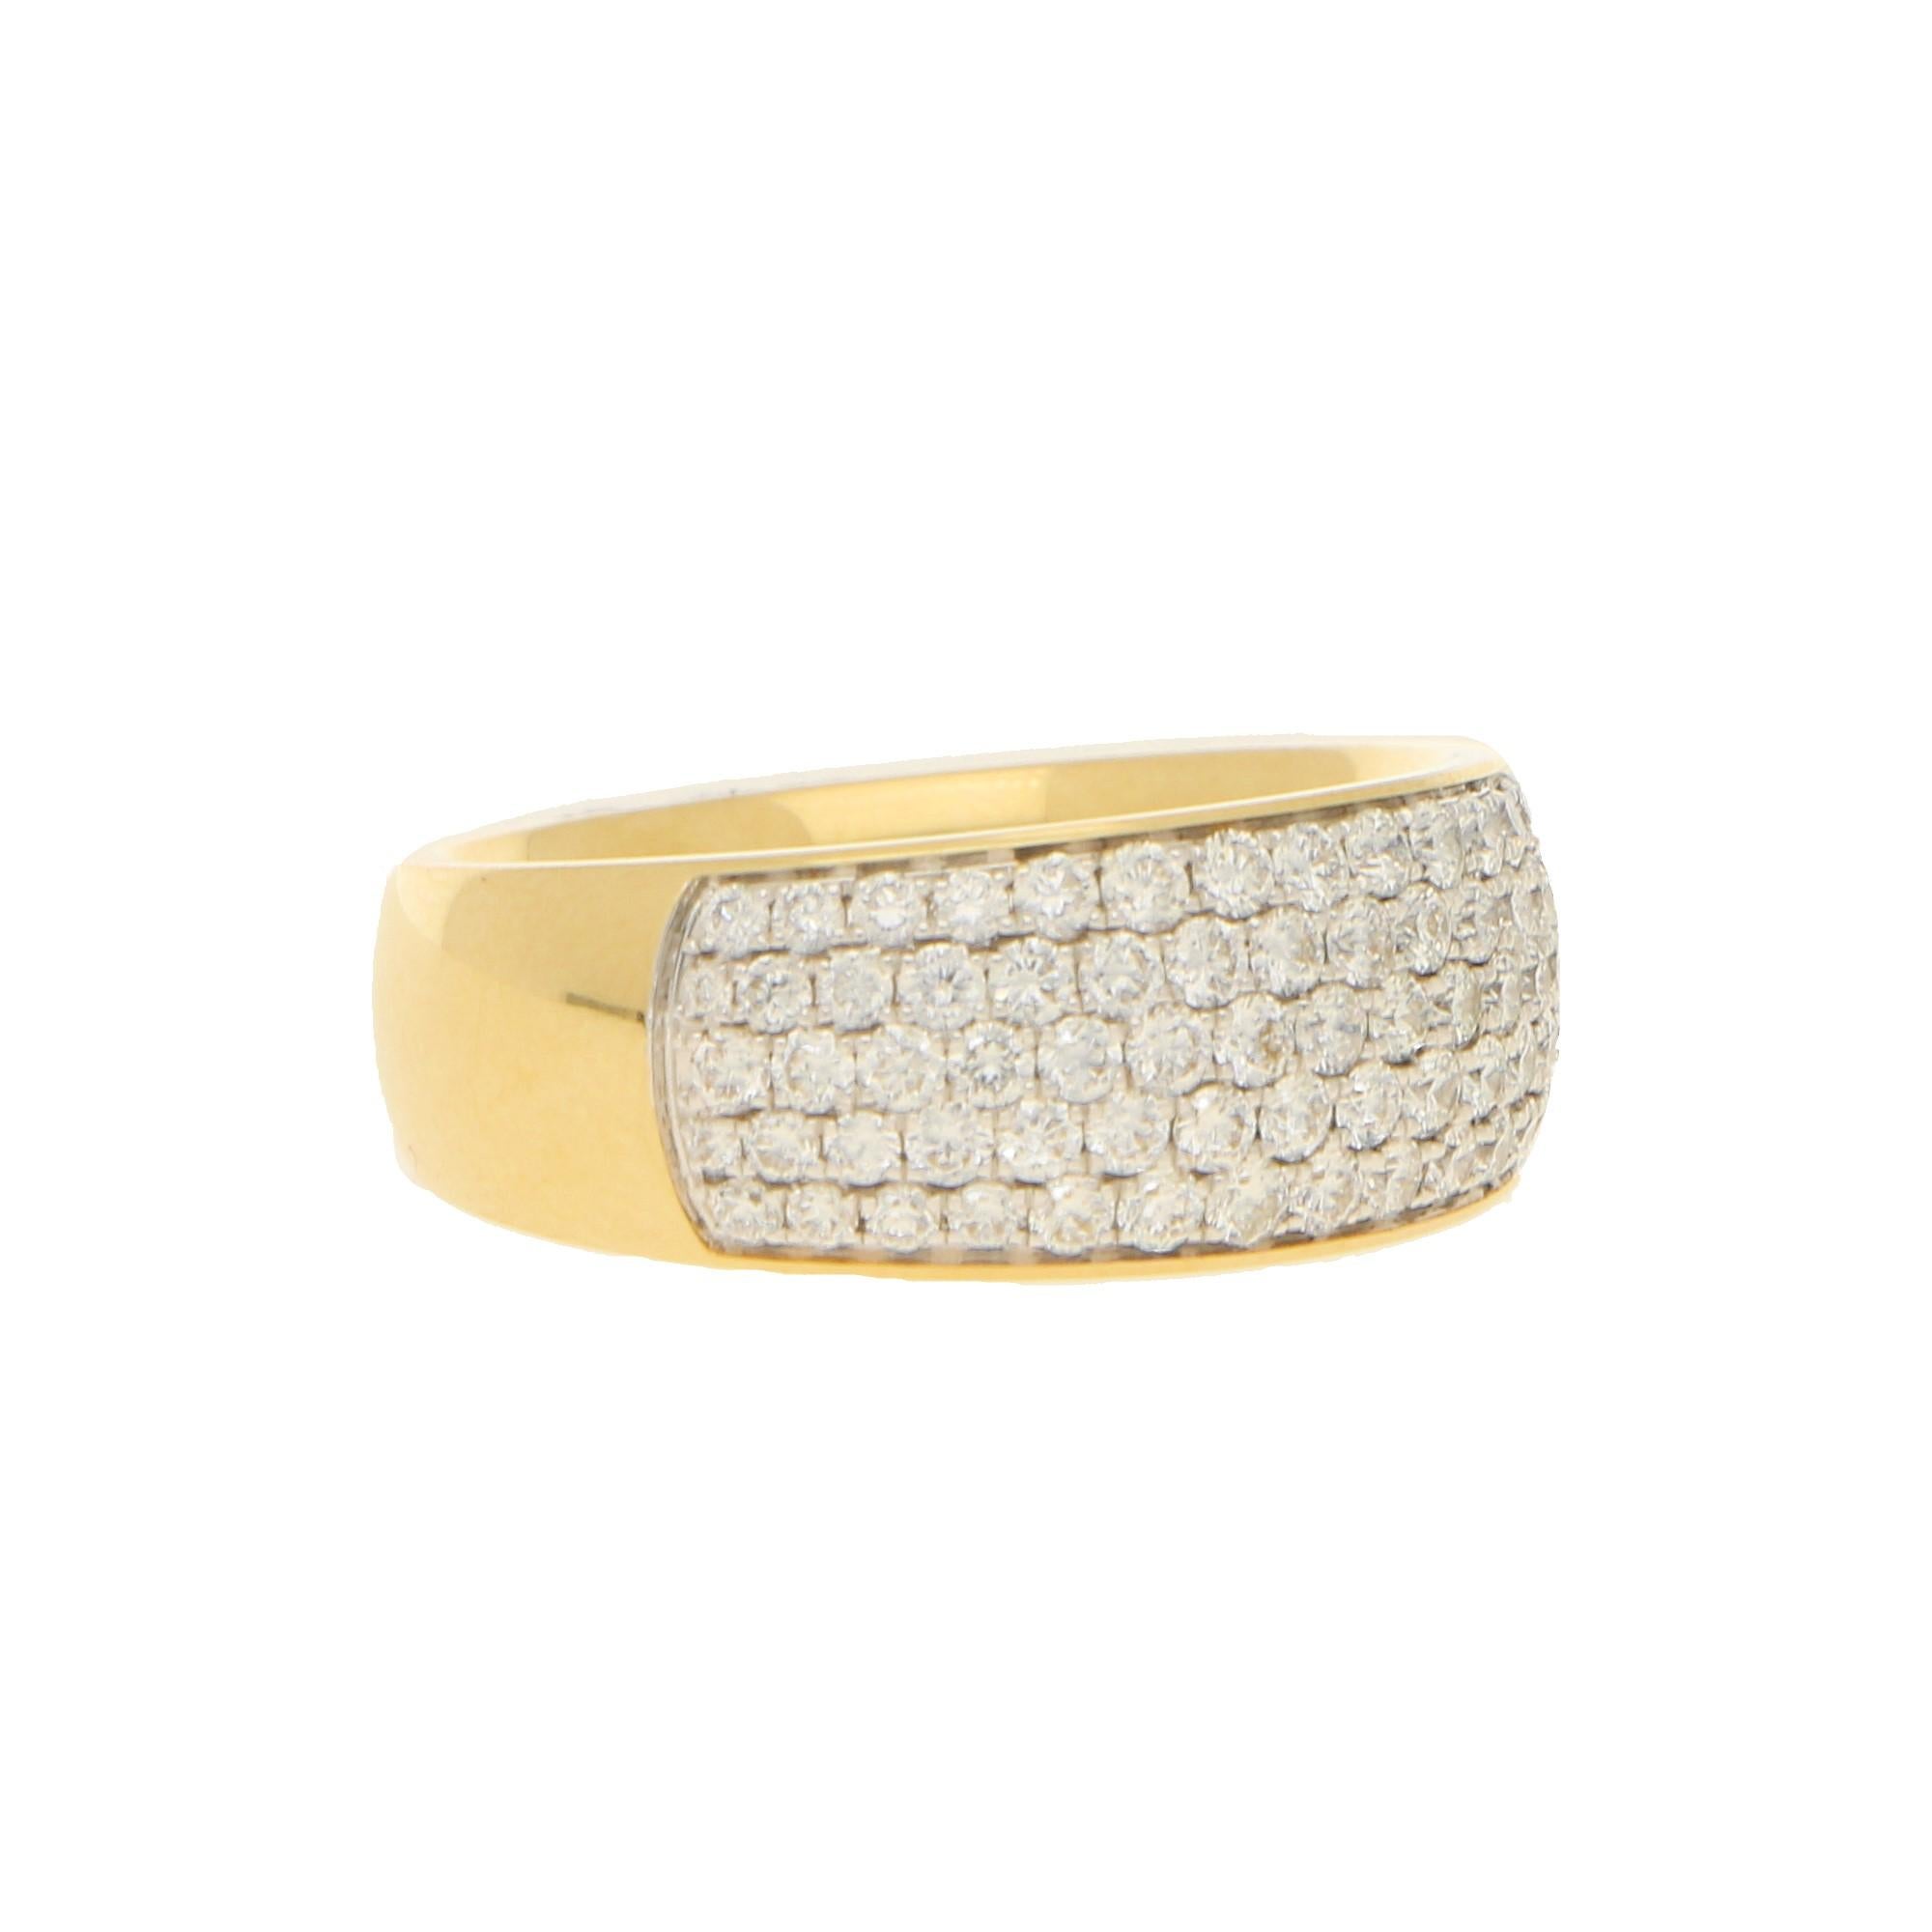 Contemporary Pave Set Diamond Ring in 18 Carat Yellow Gold 1.10ct